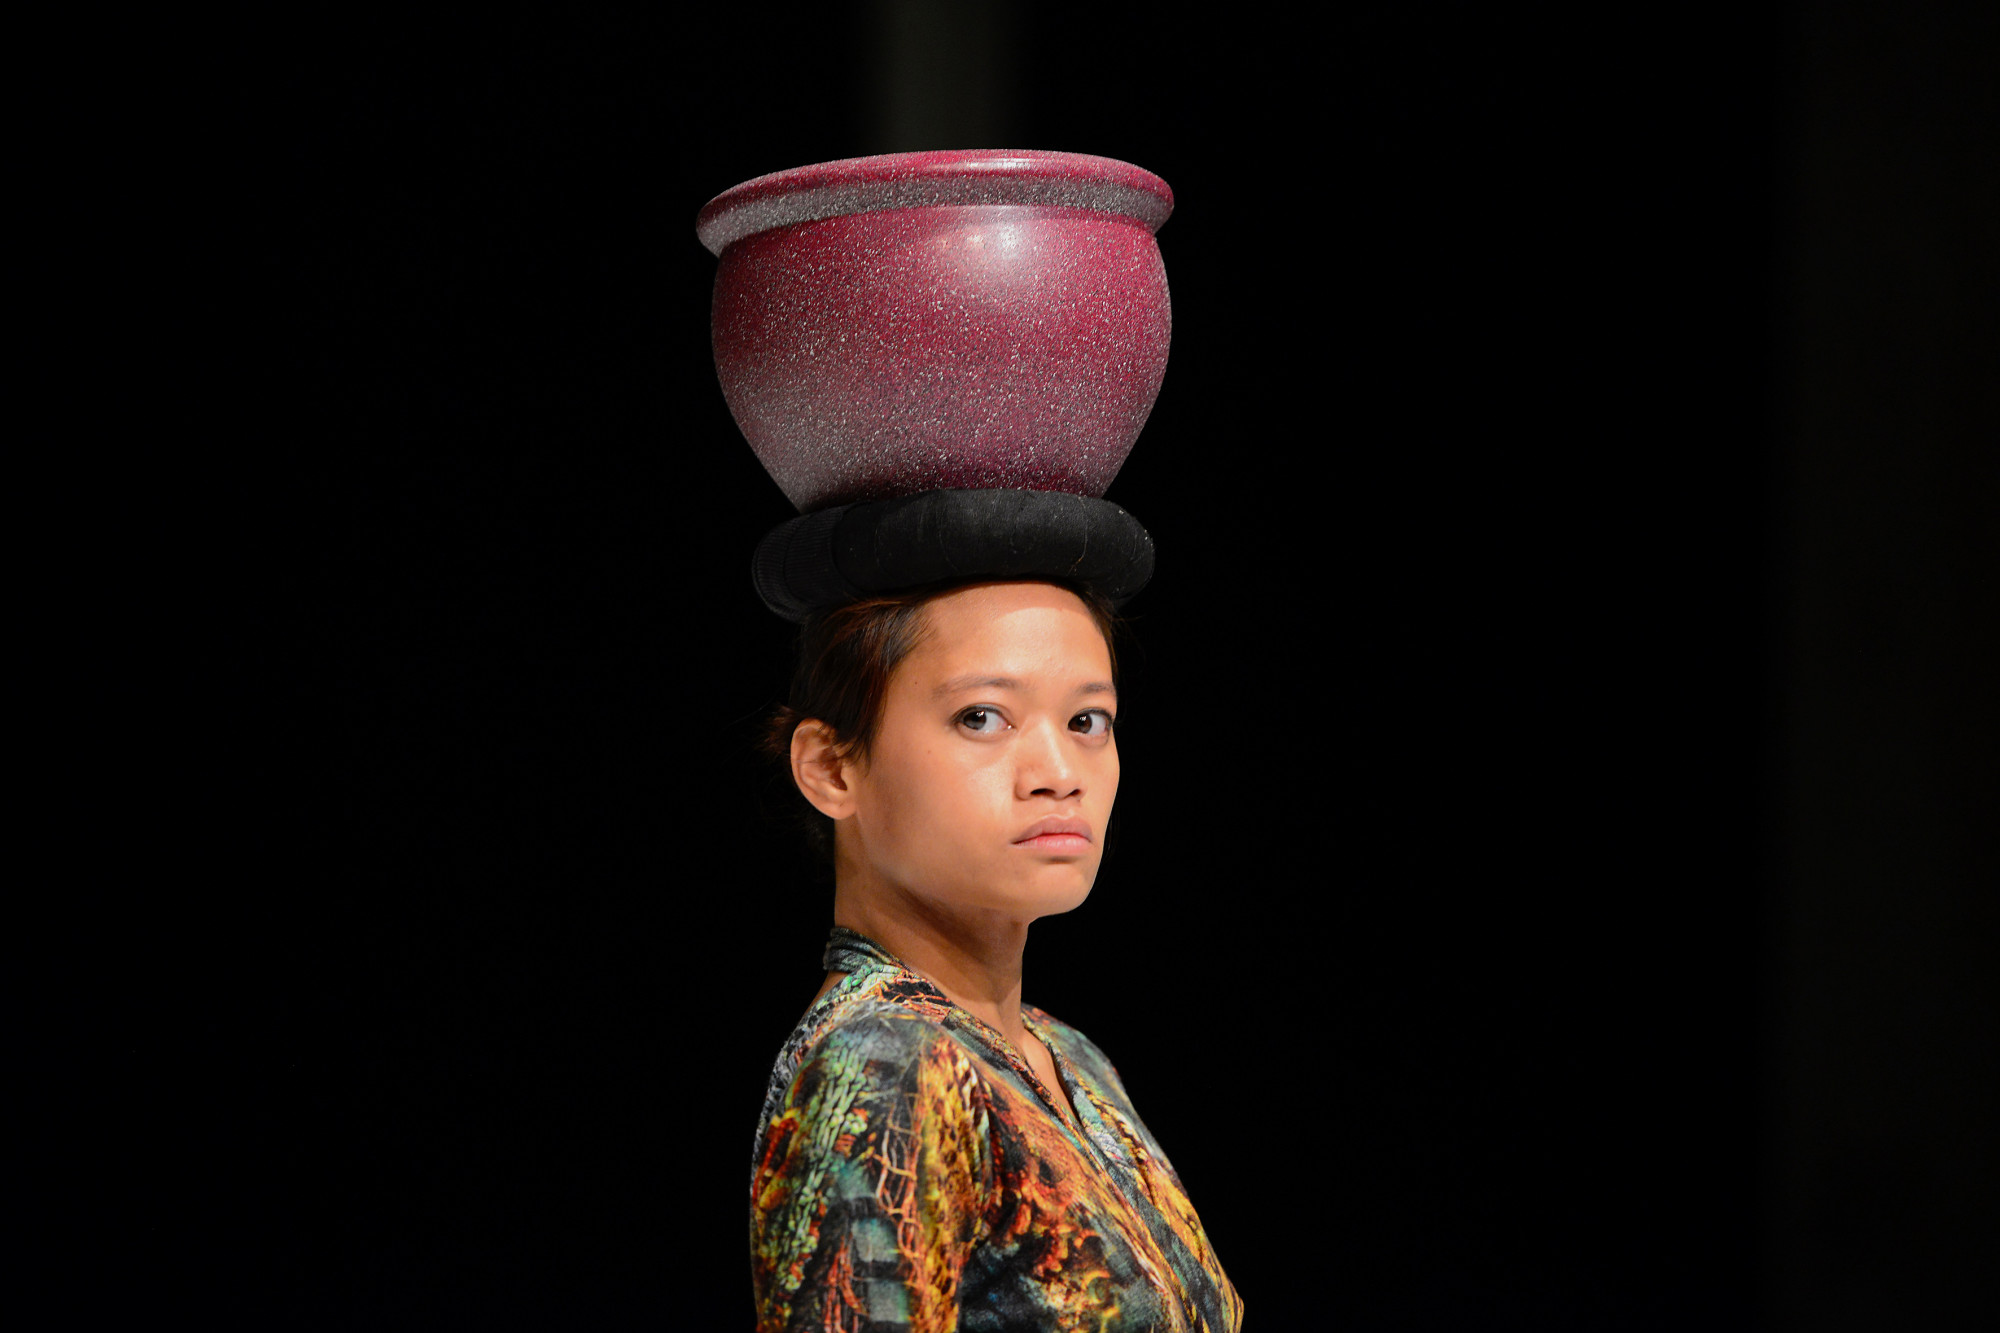 A young woman looks over her shoulder with a red vase balancing on her head.